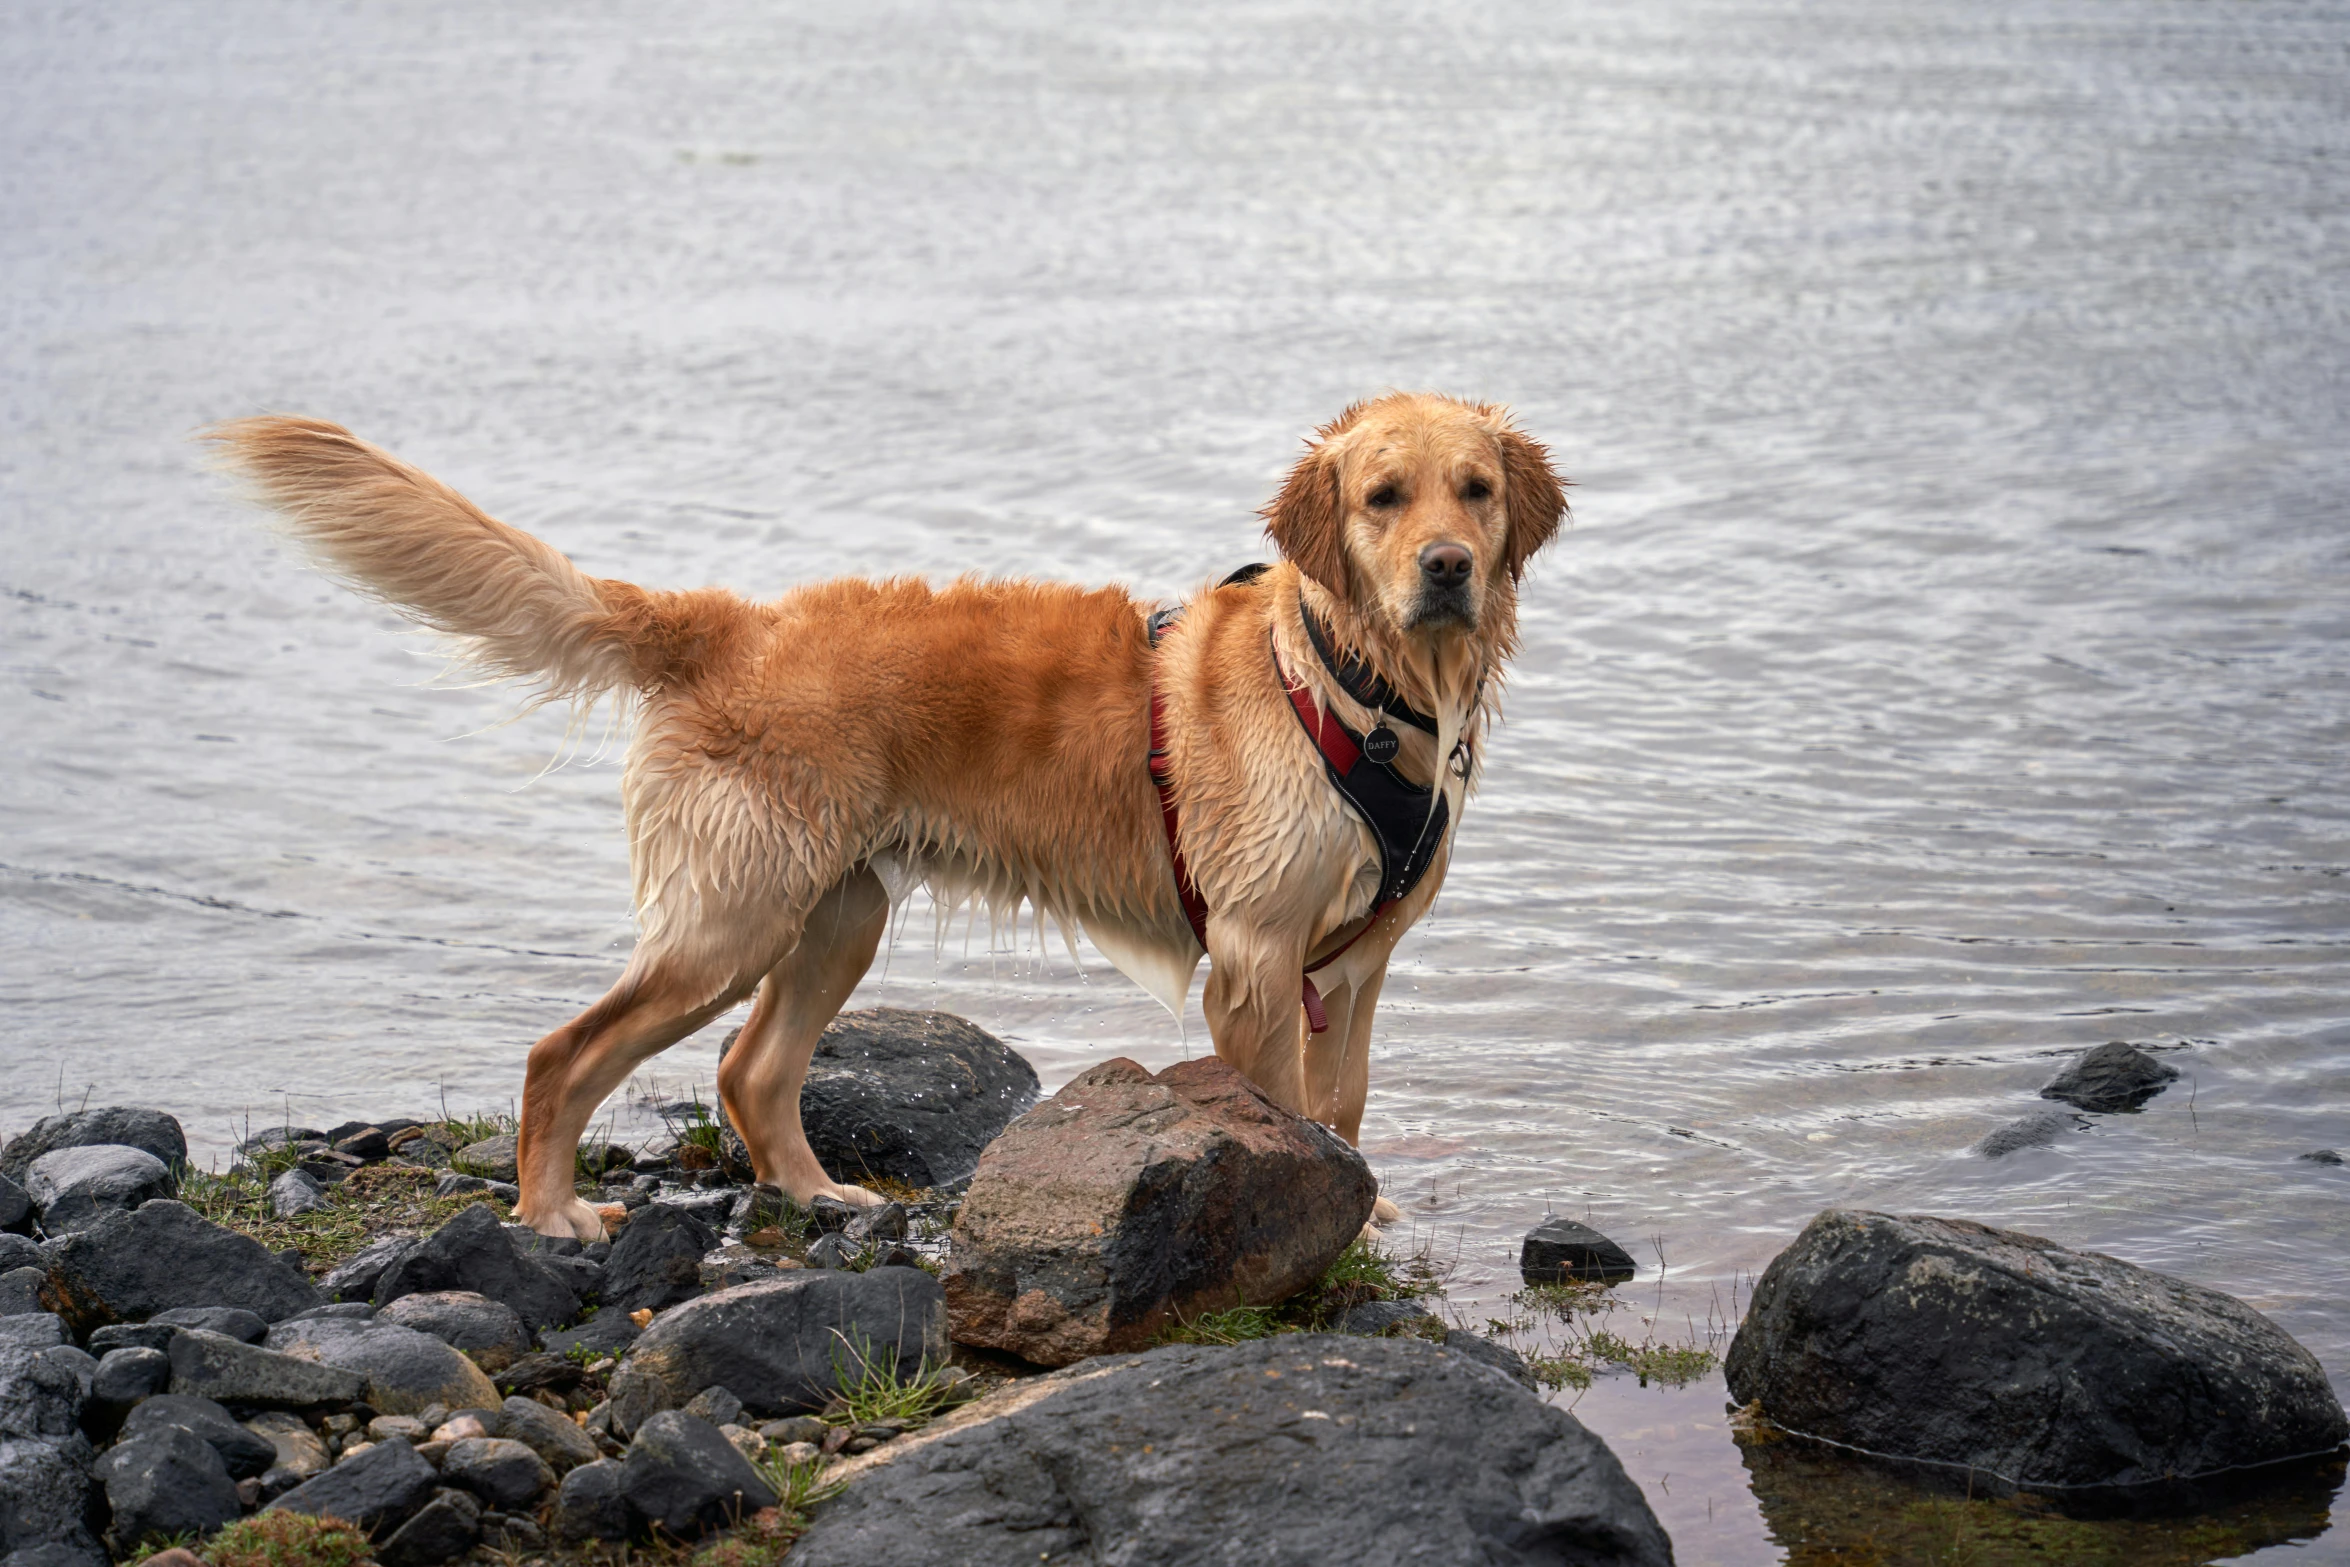 dog in harness standing on rocky shore near body of water